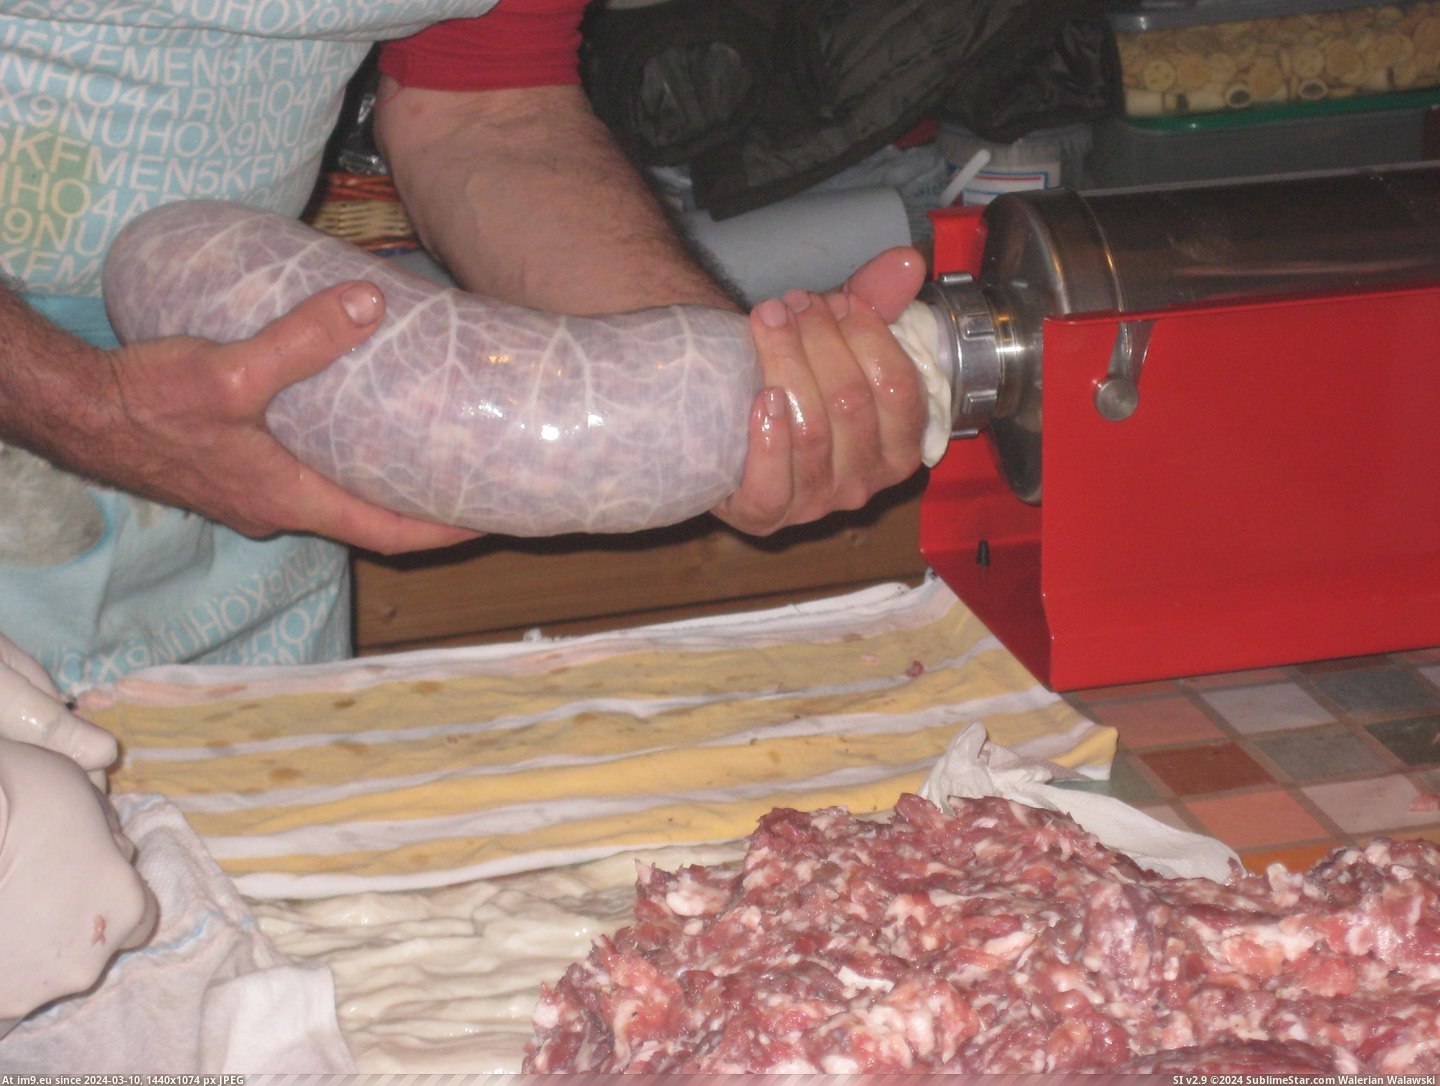 #Making #Homemade #Italy [Pics] Making homemade salami in Italy 2 Pic. (Image of album My r/PICS favs))